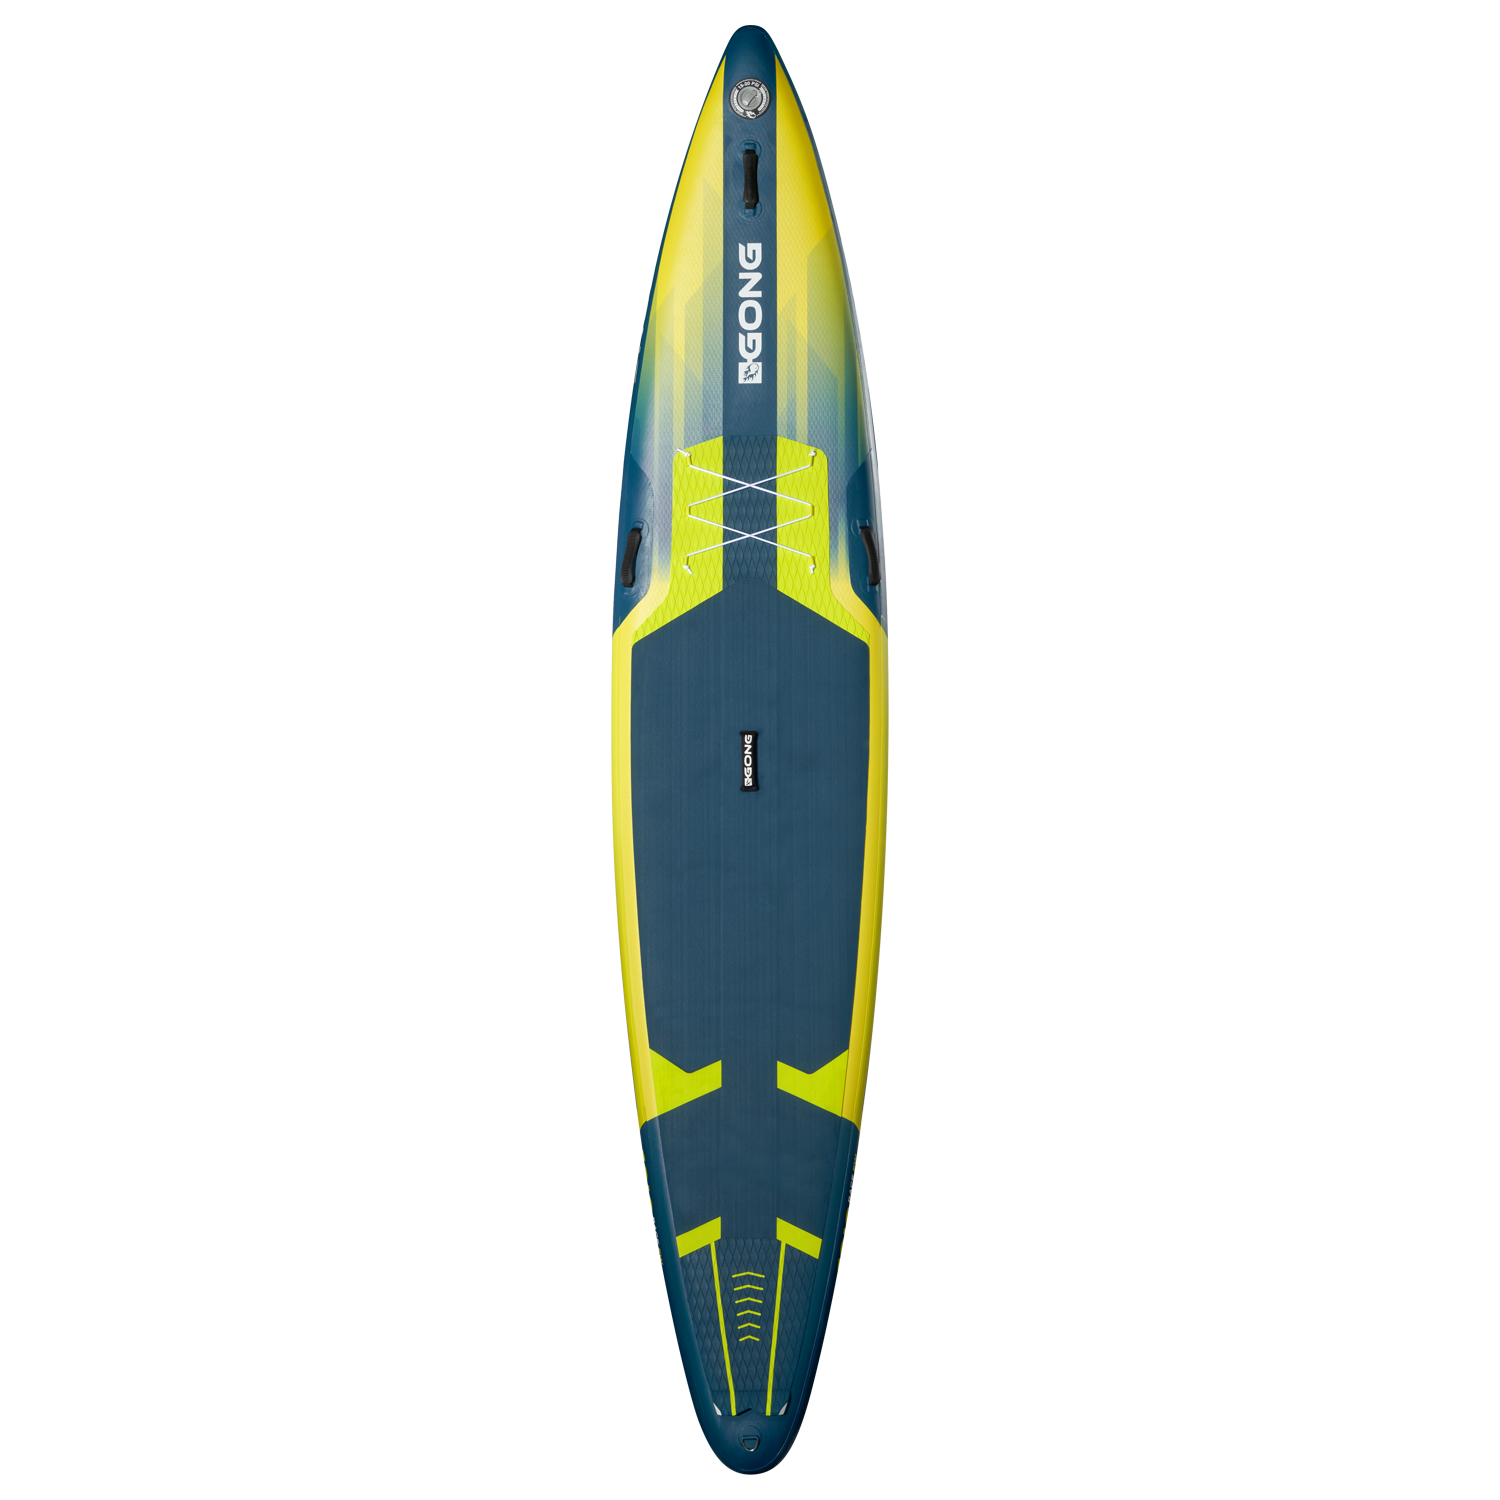 GONG | SUP Inflatable 12'6 Couine Marie Race Flat Water